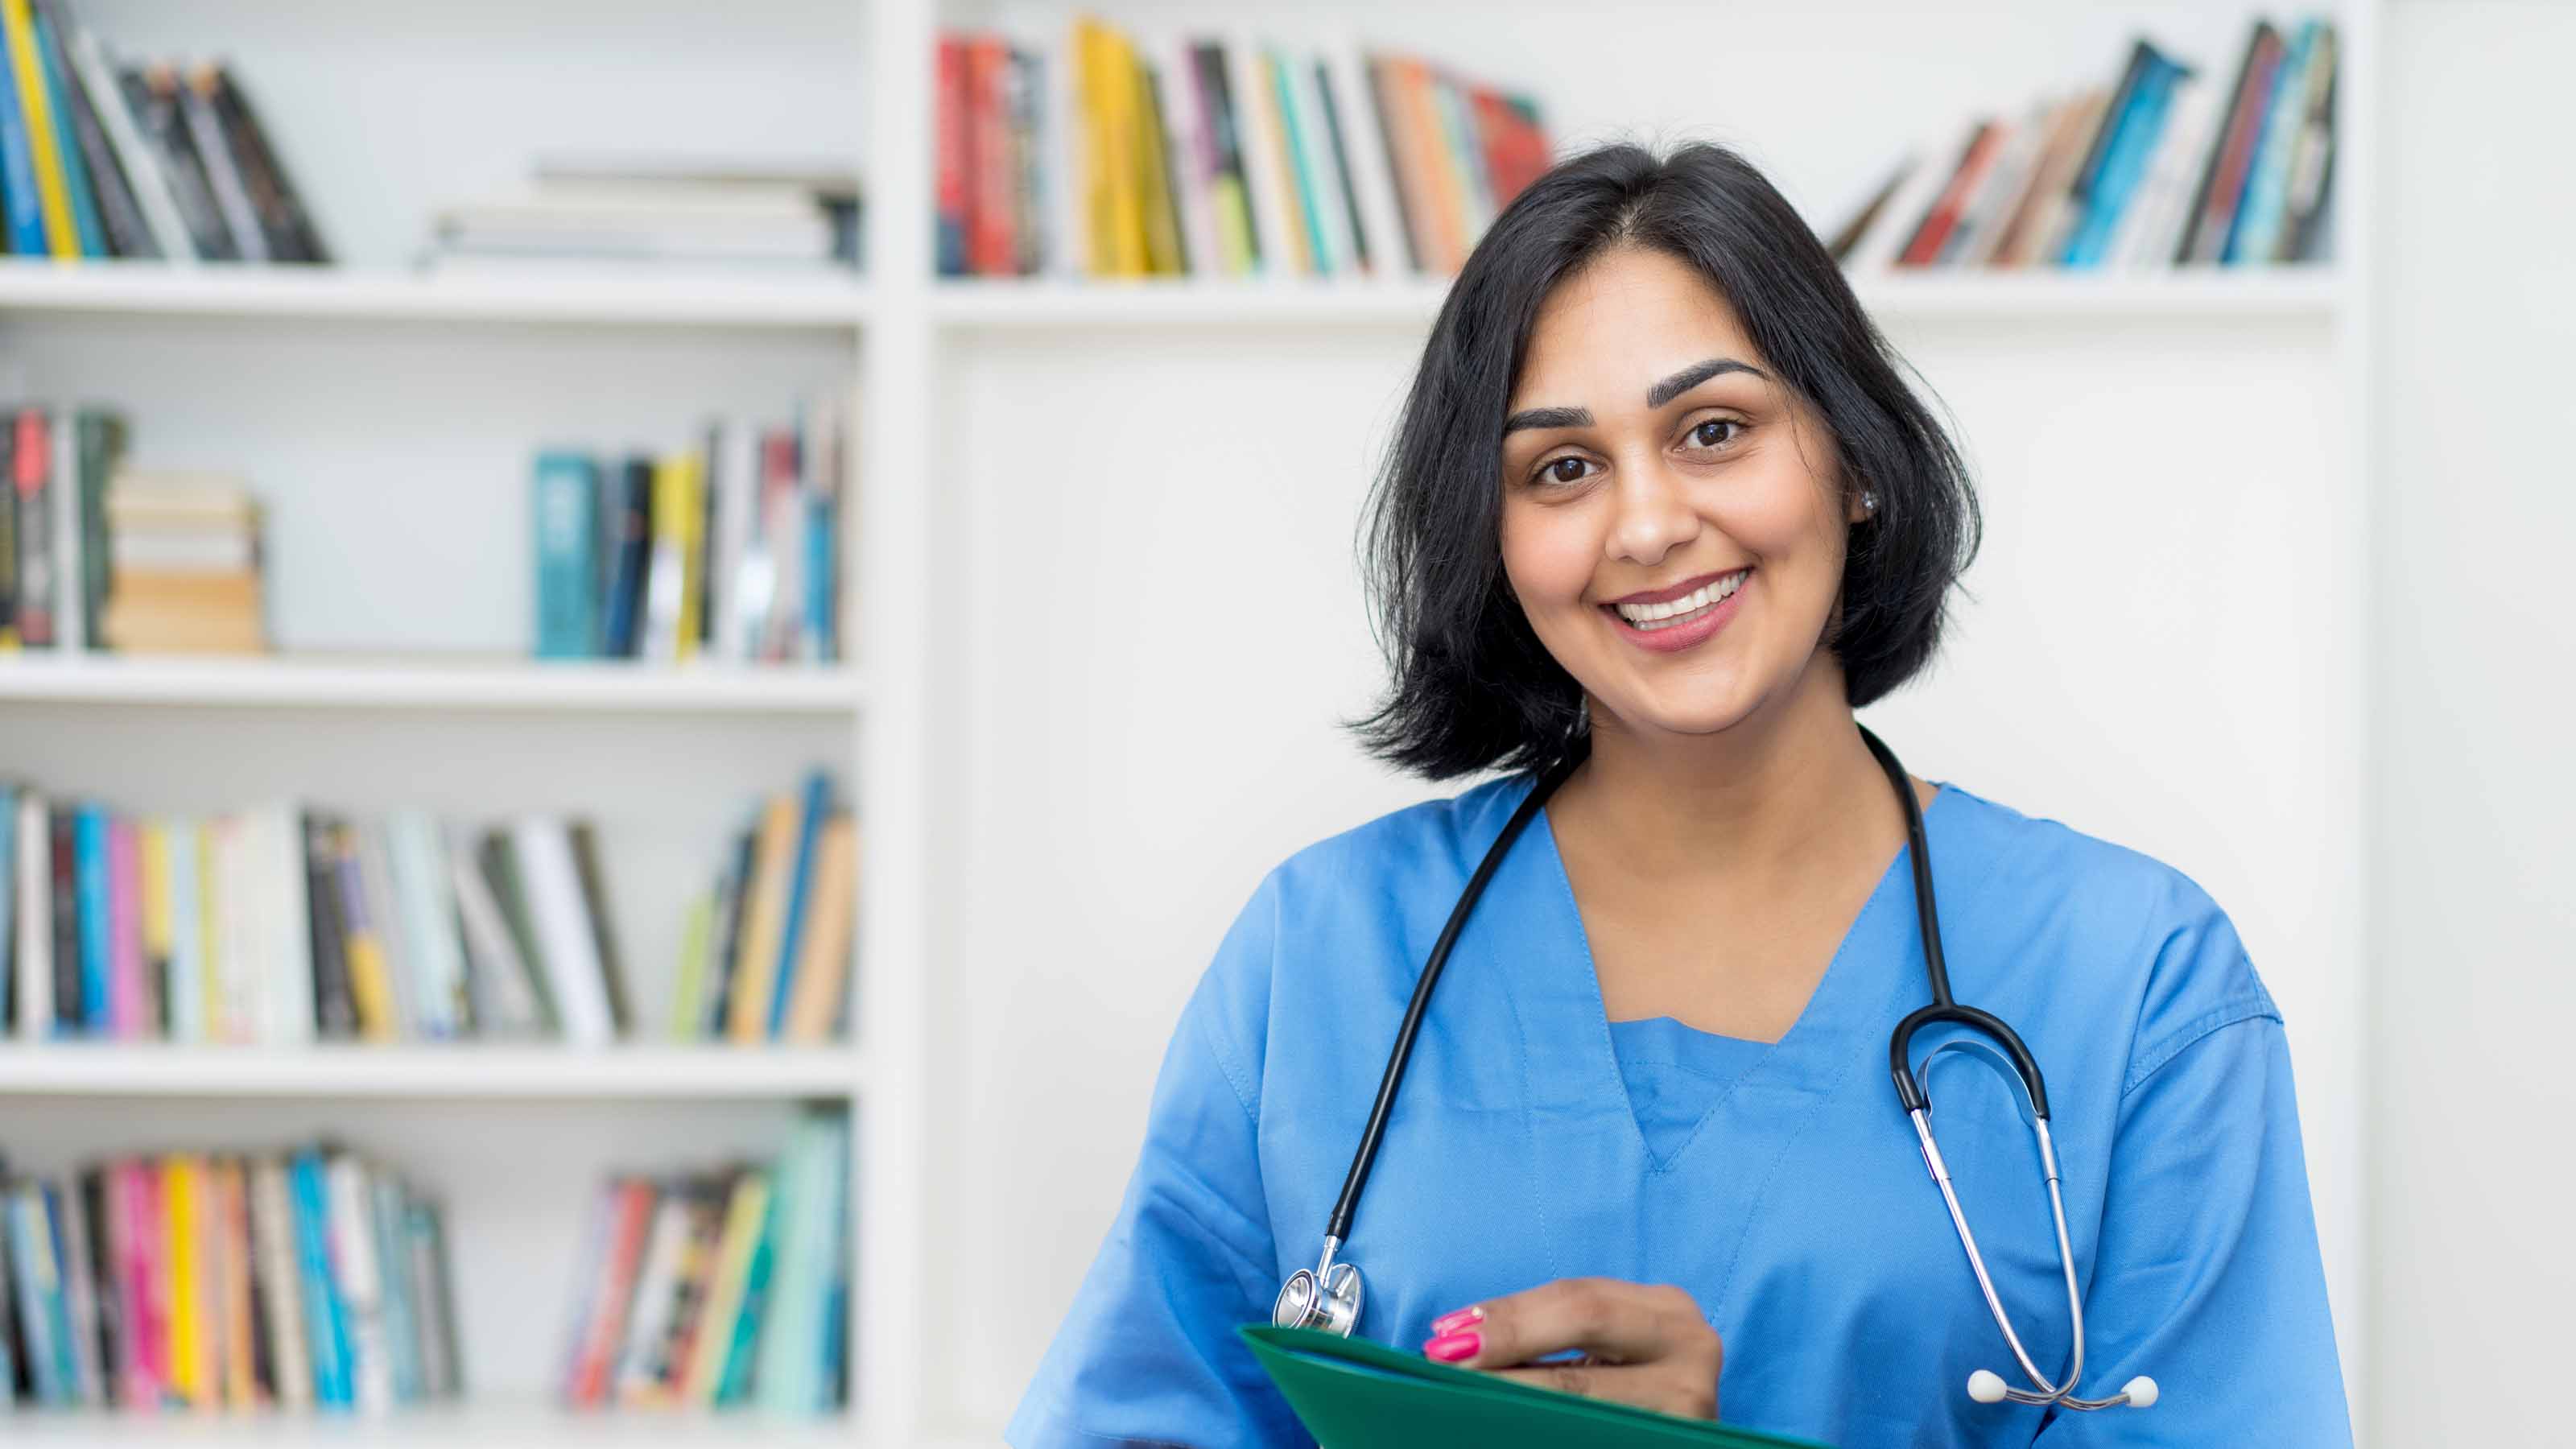 Smiling female nurse with file of patient